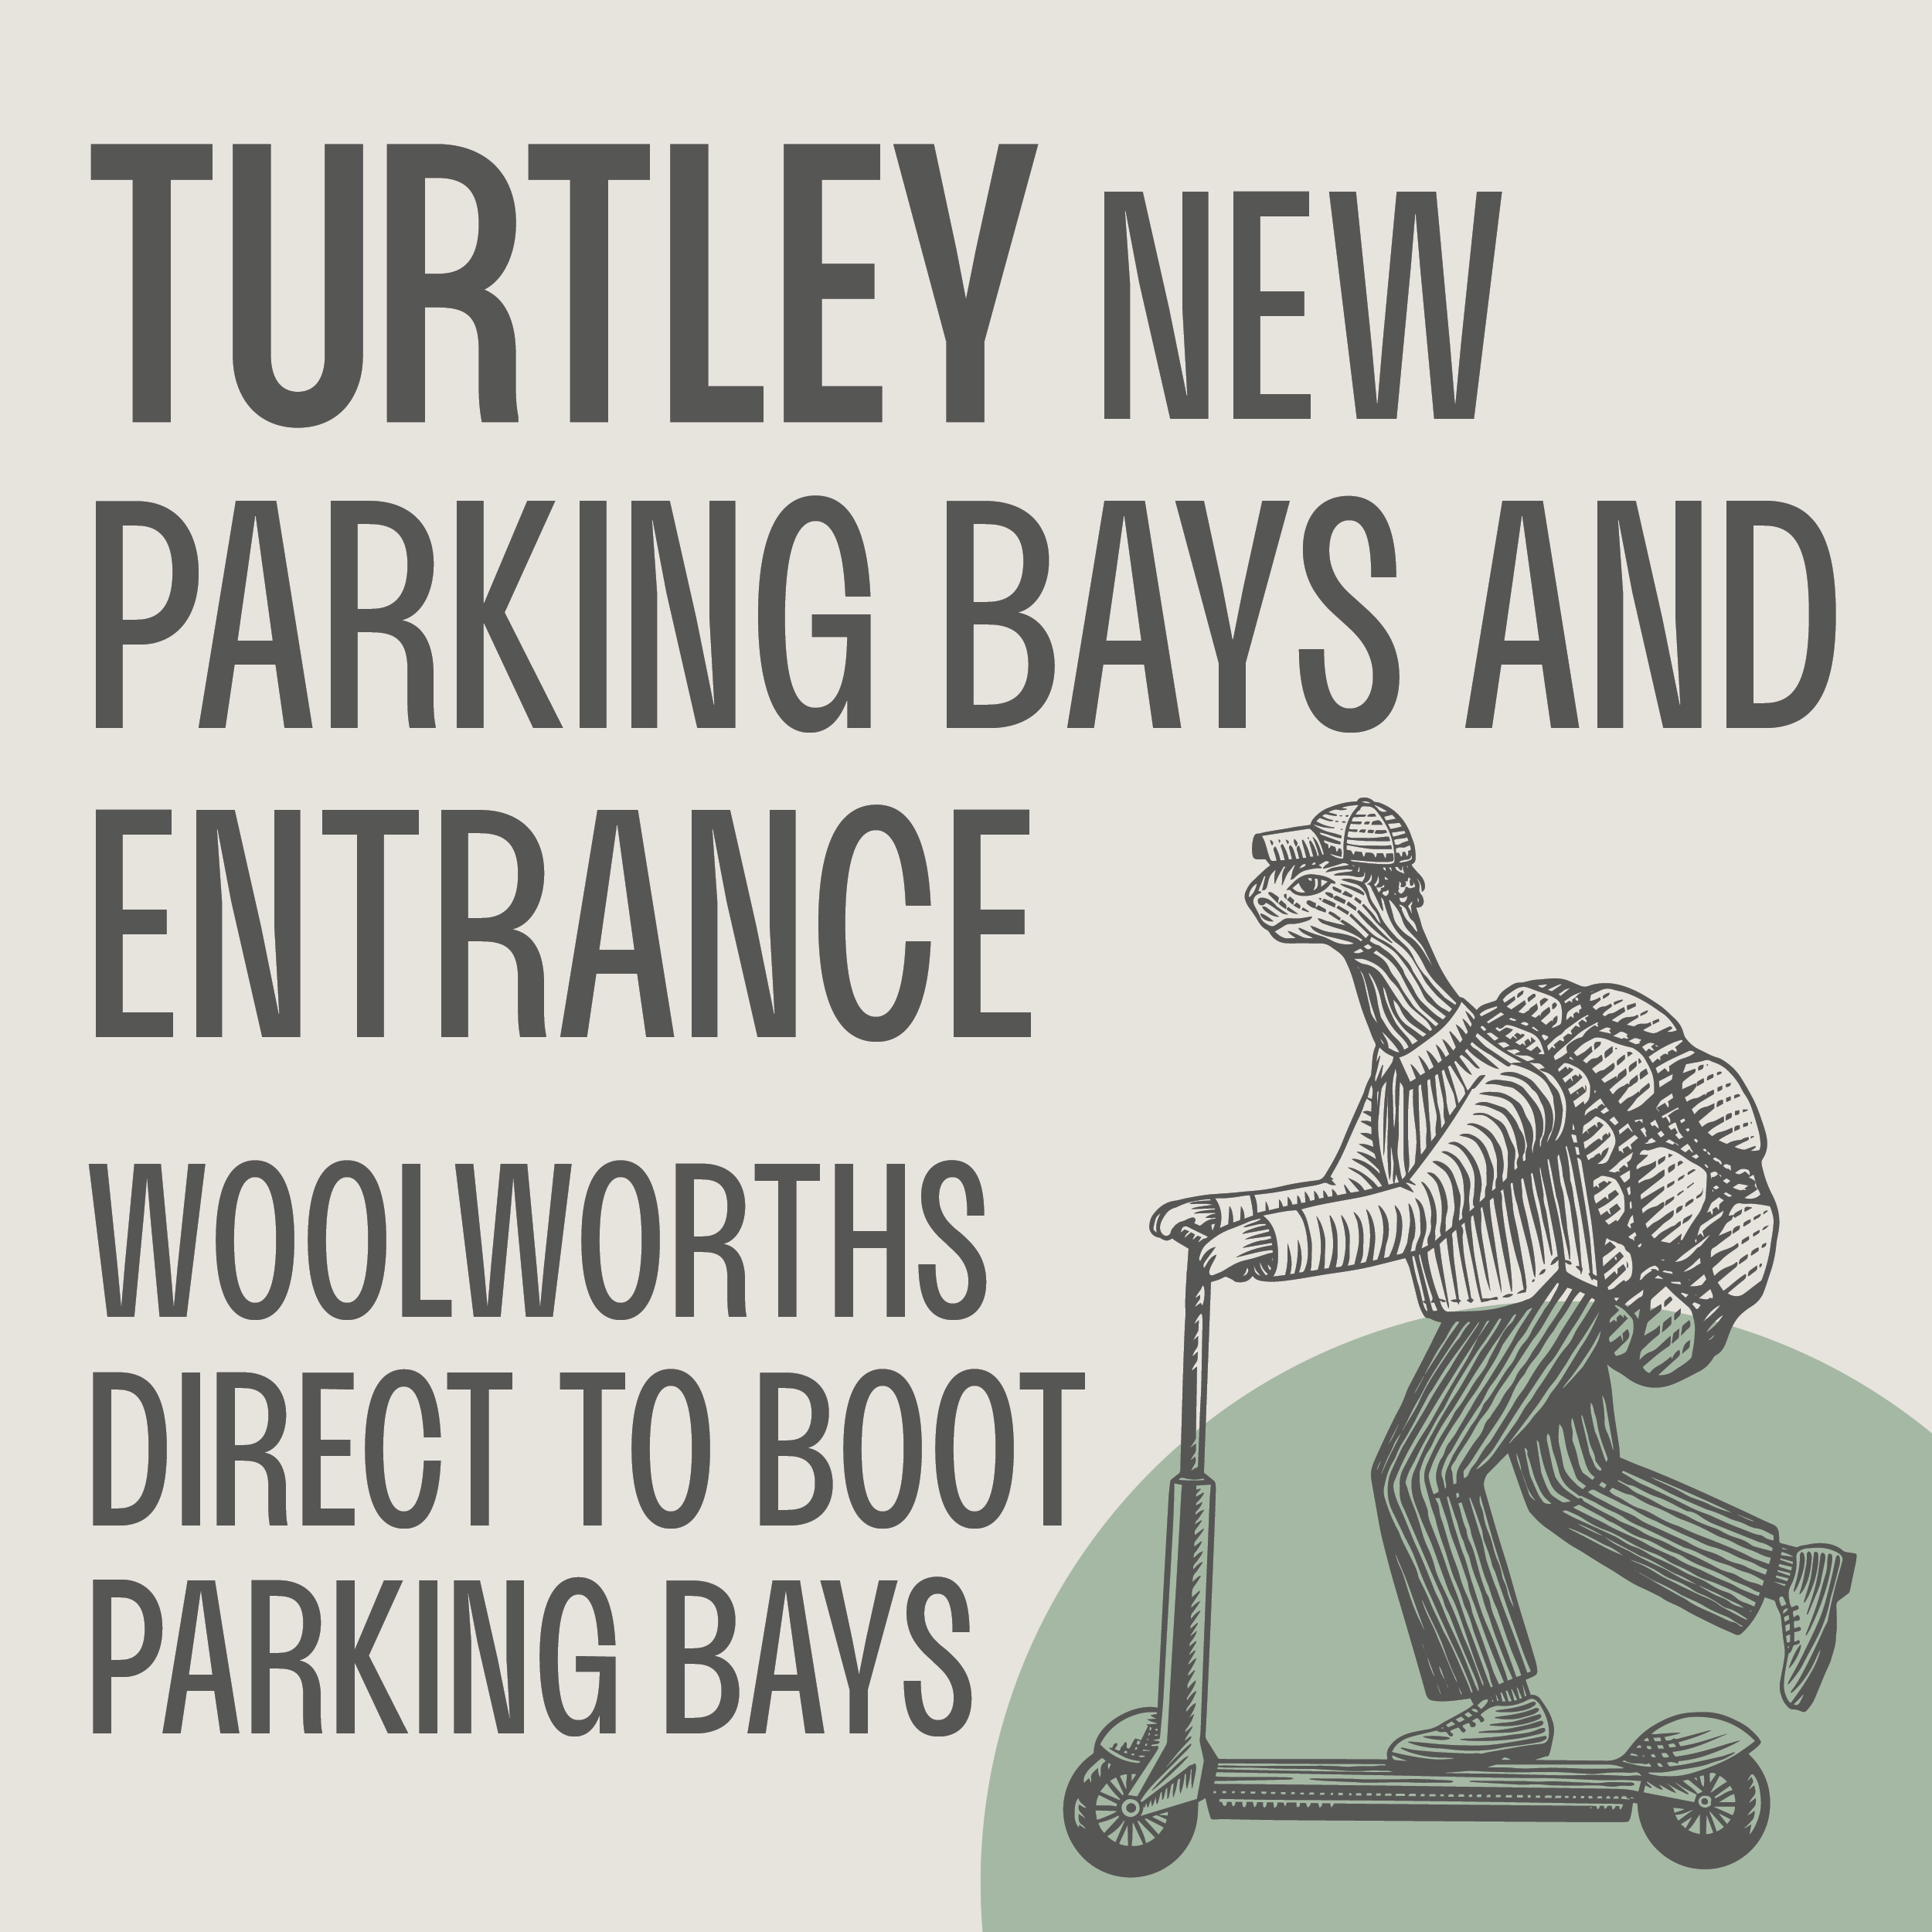 TURTLEY NEW PARKING BAYS AND ENTRANCE. WOOLWORTHS DIRECT TO BOOT PARKING BAYS.